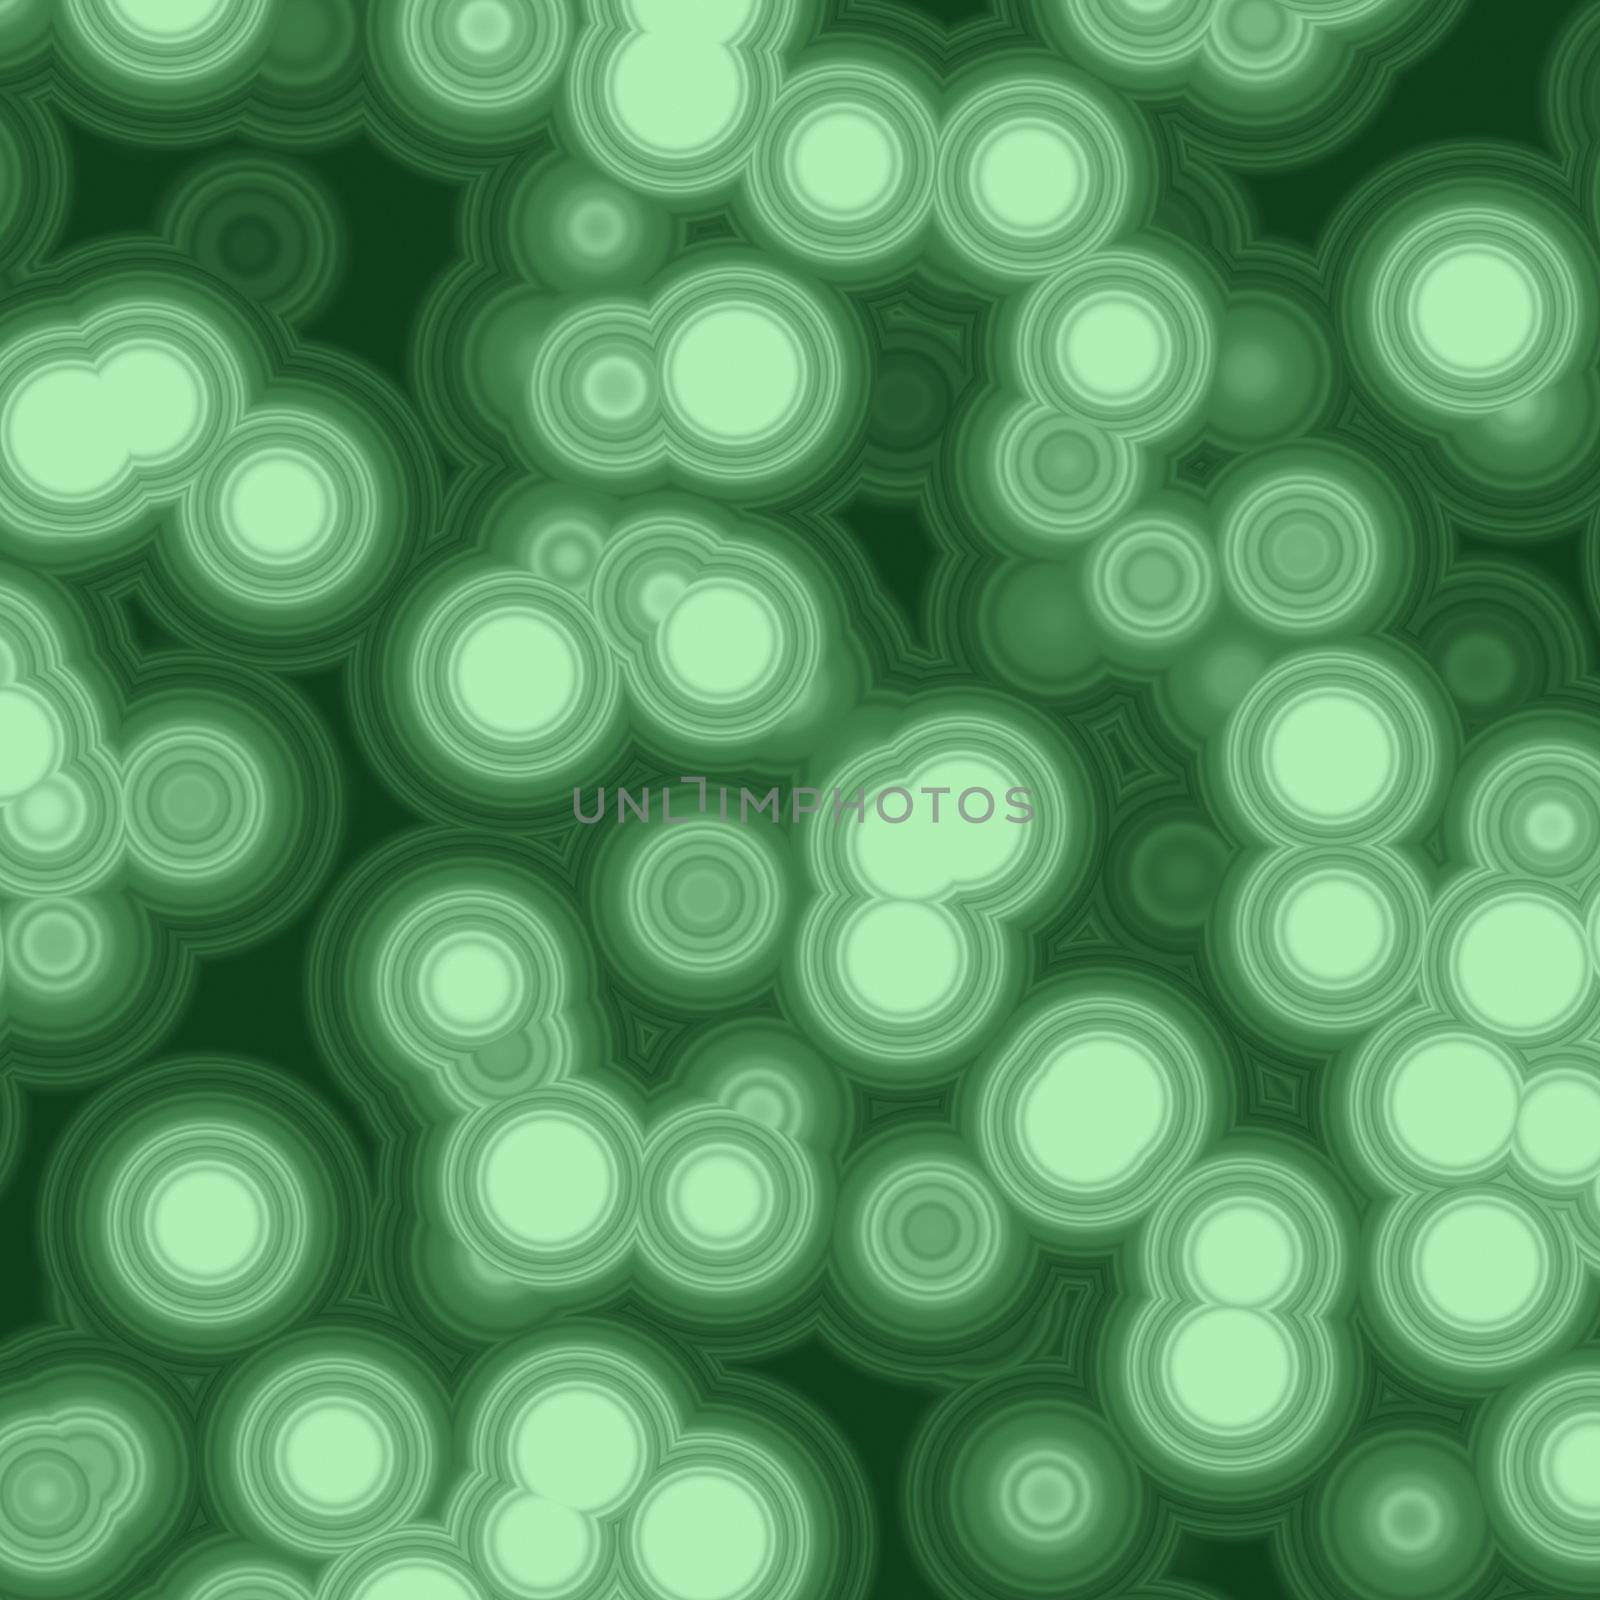 A Bacteria Cell Biology Growth Abstract Background